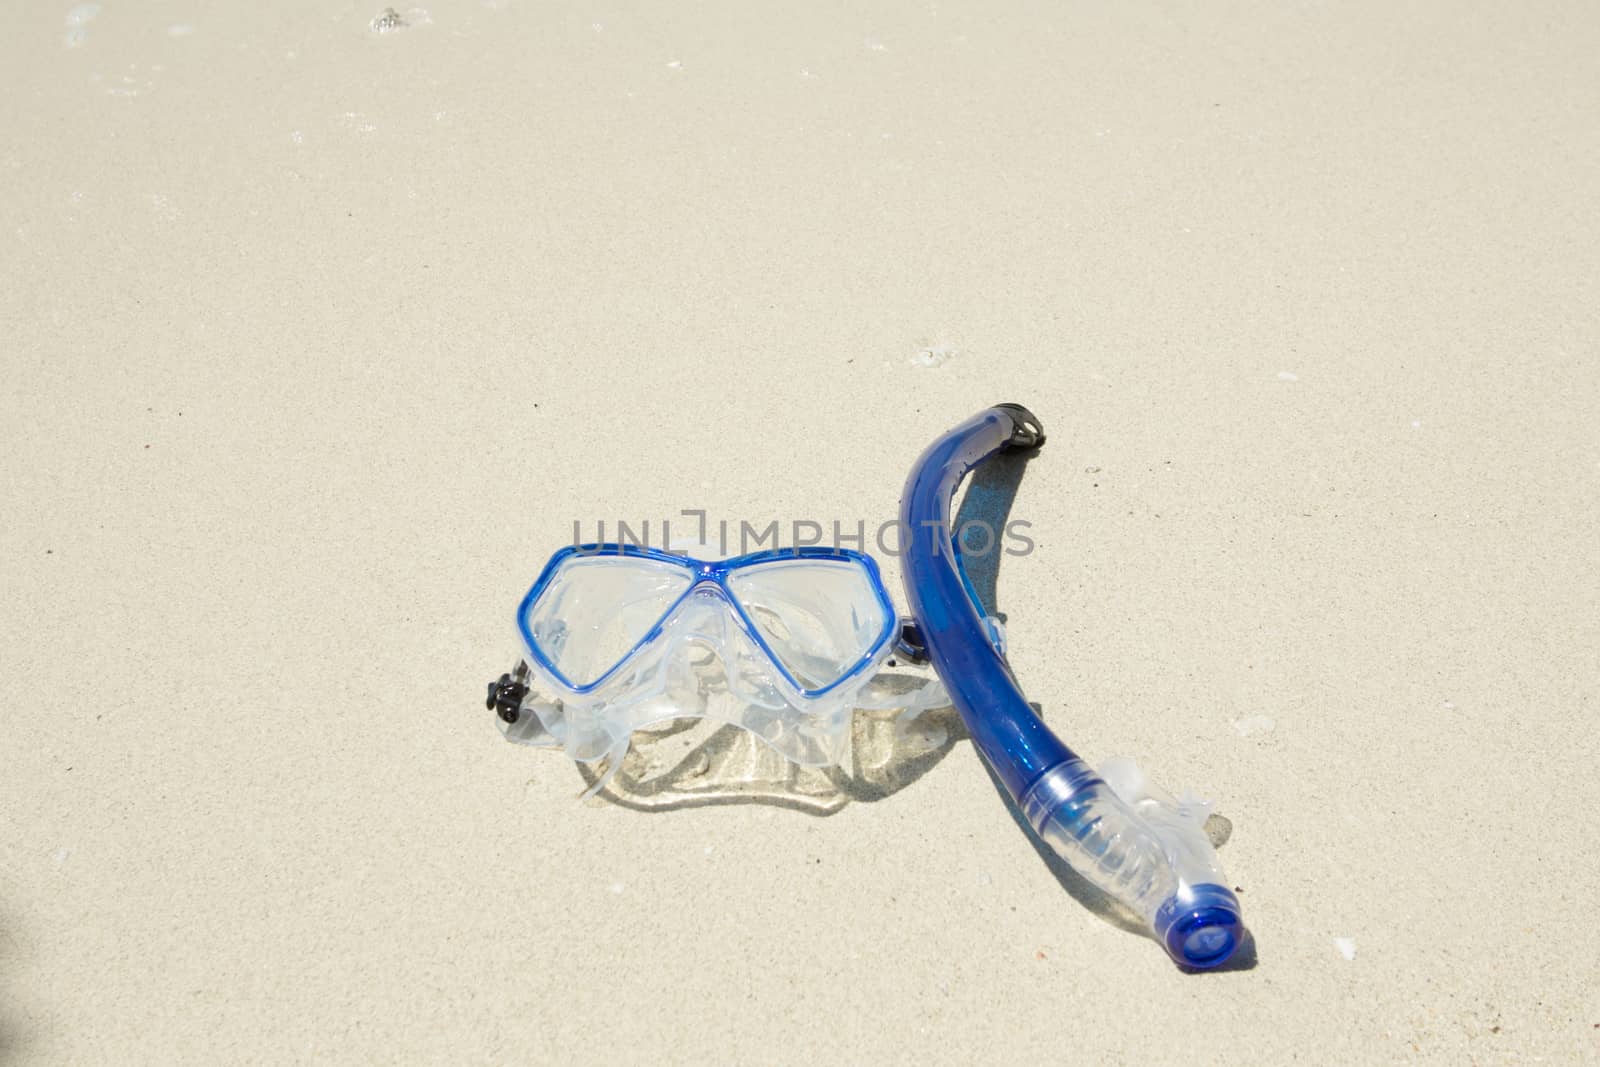 snorkel and mask on white sand  by wyoosumran